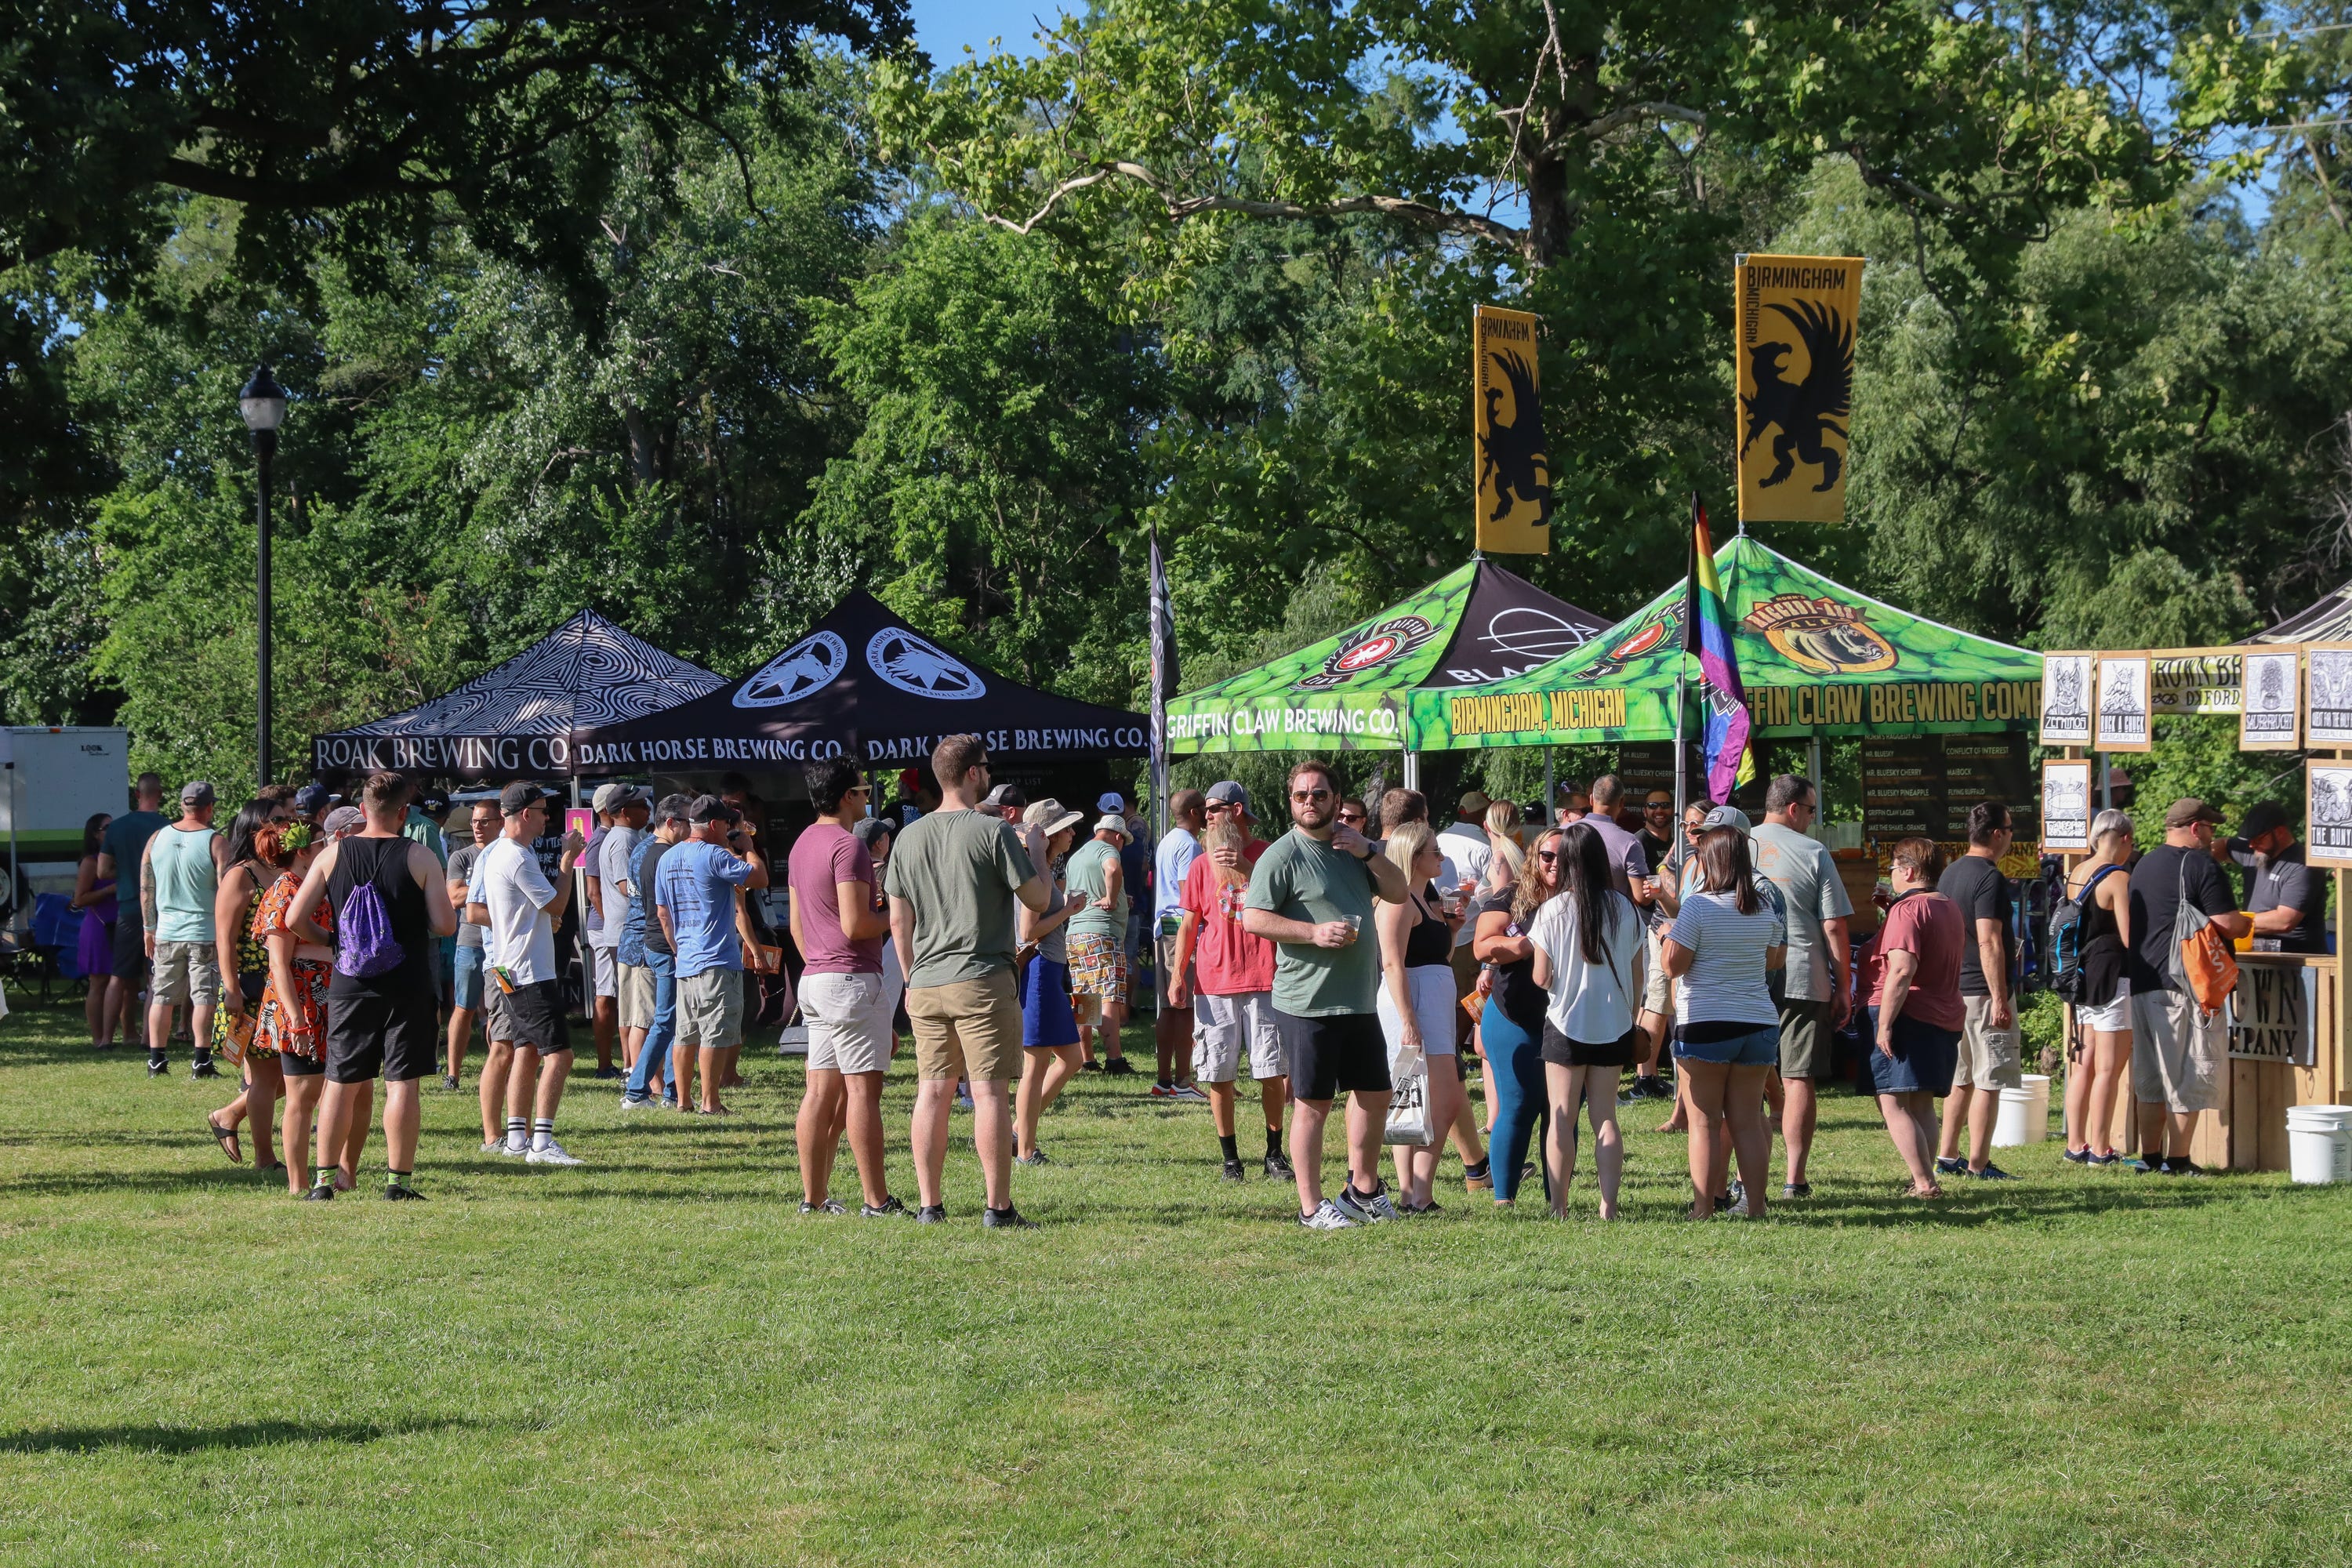 Beer fans line up at a series of brewer tents along the Huron River in Ypsilanti's Riverside Park on Friday, July 22, 2022.